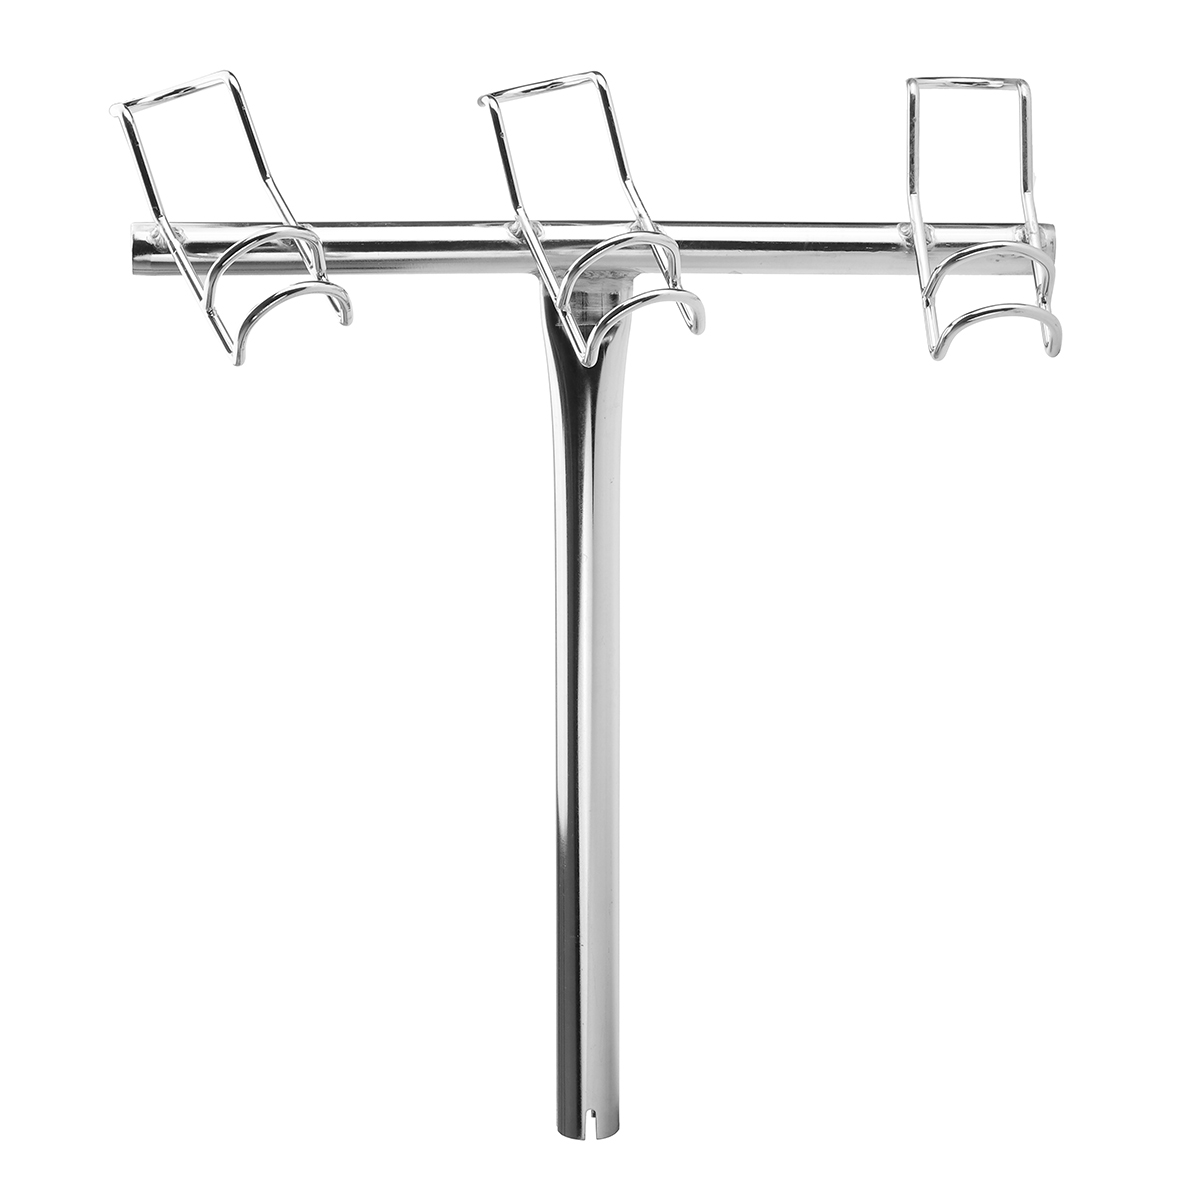 1/2/3 Rod Fishing Support Rod Rack Stand Bracket Stainless Steel for Boat Marine Hardware Kits - Auto GoShop